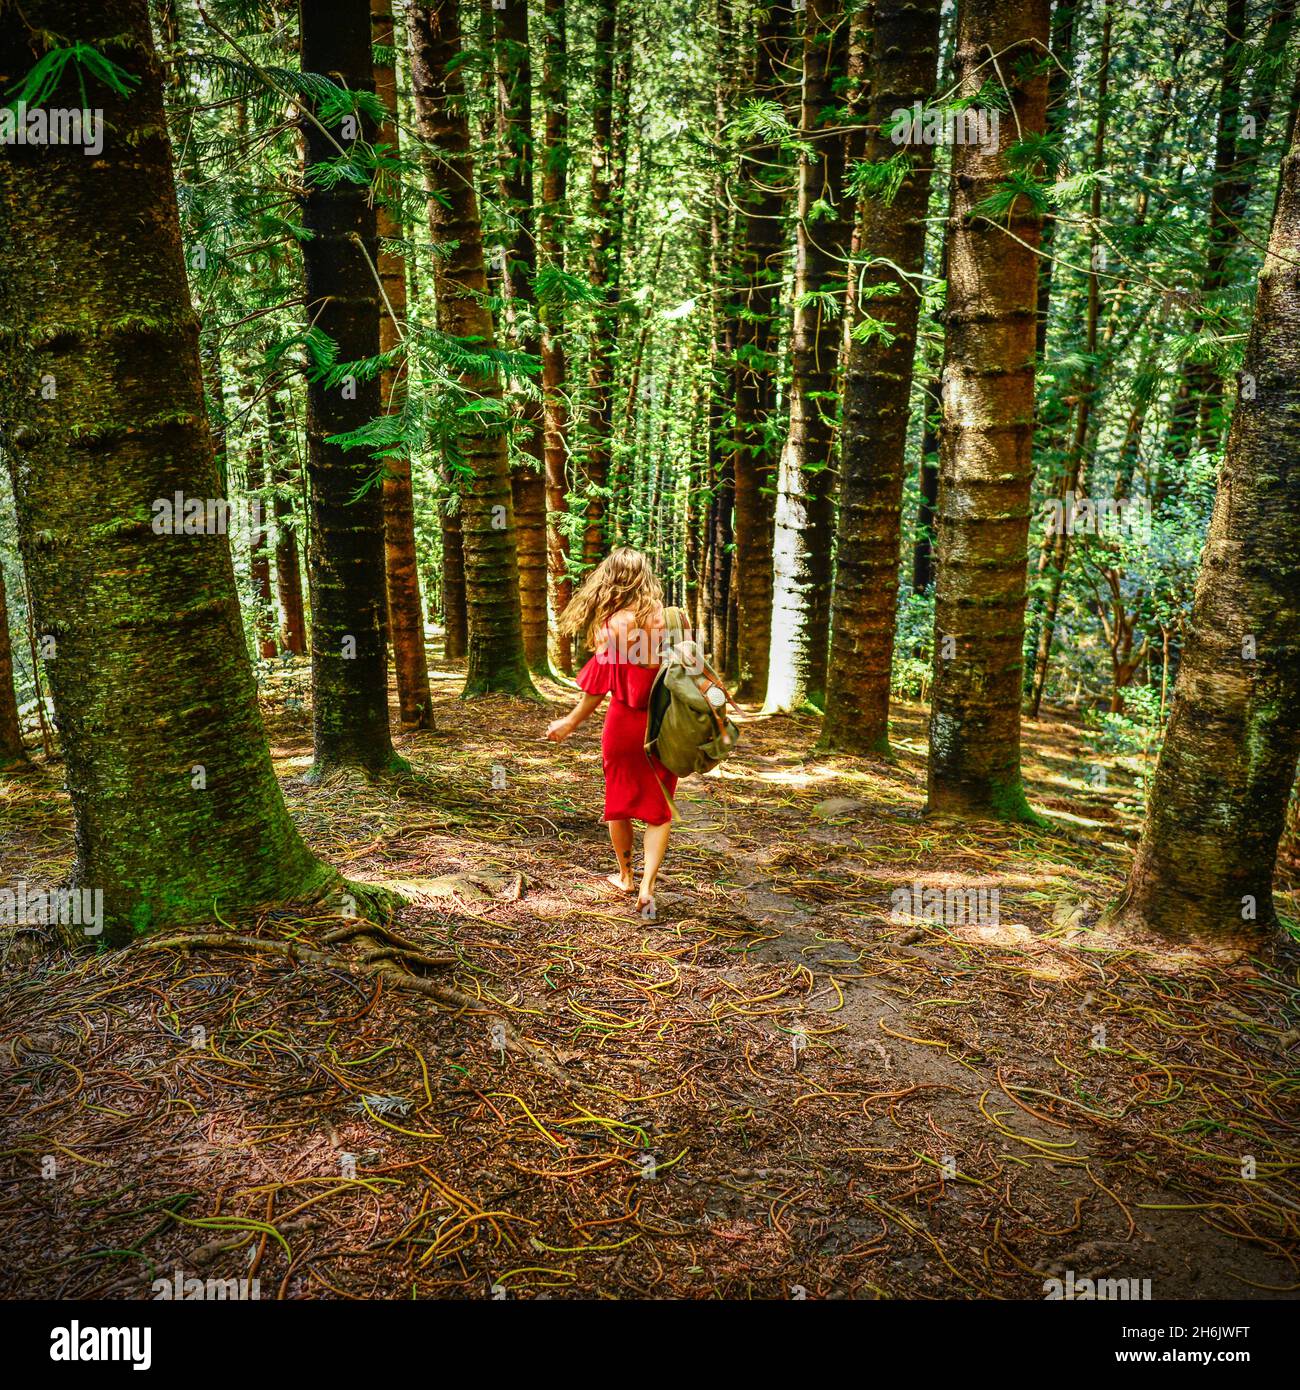 A barefoot woman in a red dress carries a travel pack over her shoulder through a tall forest, Kapaa, Hawaii, United States of America, Pacific Stock Photo